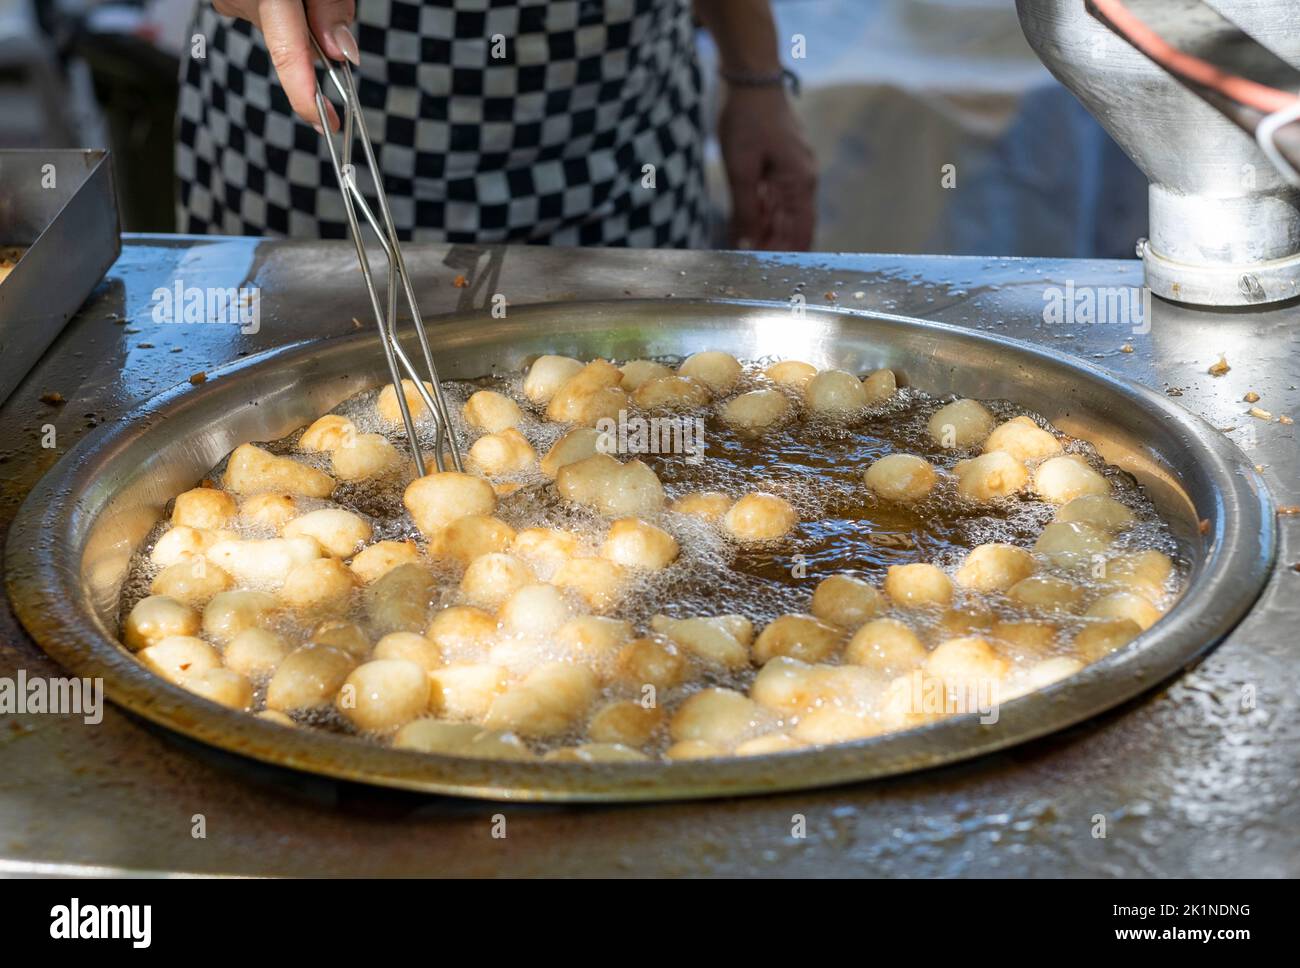 Loukoumades (Cypriot doughnuts) being made at the Statos-Agios Fotios Rural Festival, Paphos region, Cyprus Stock Photo